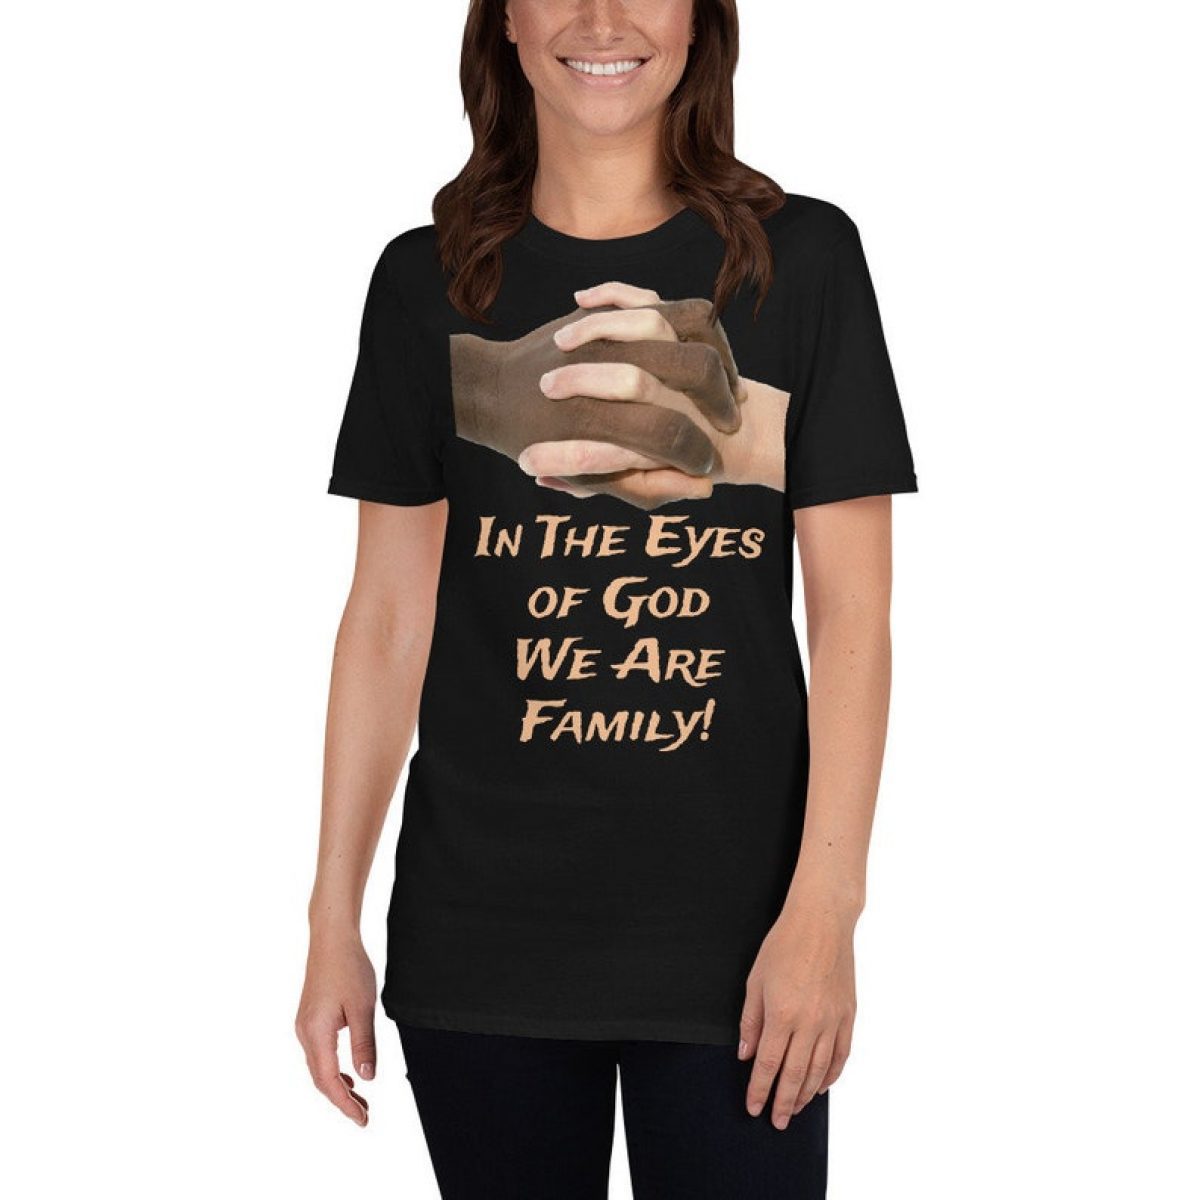 in the eyes of god we are family short sleeve unisex t shirt by the right 2